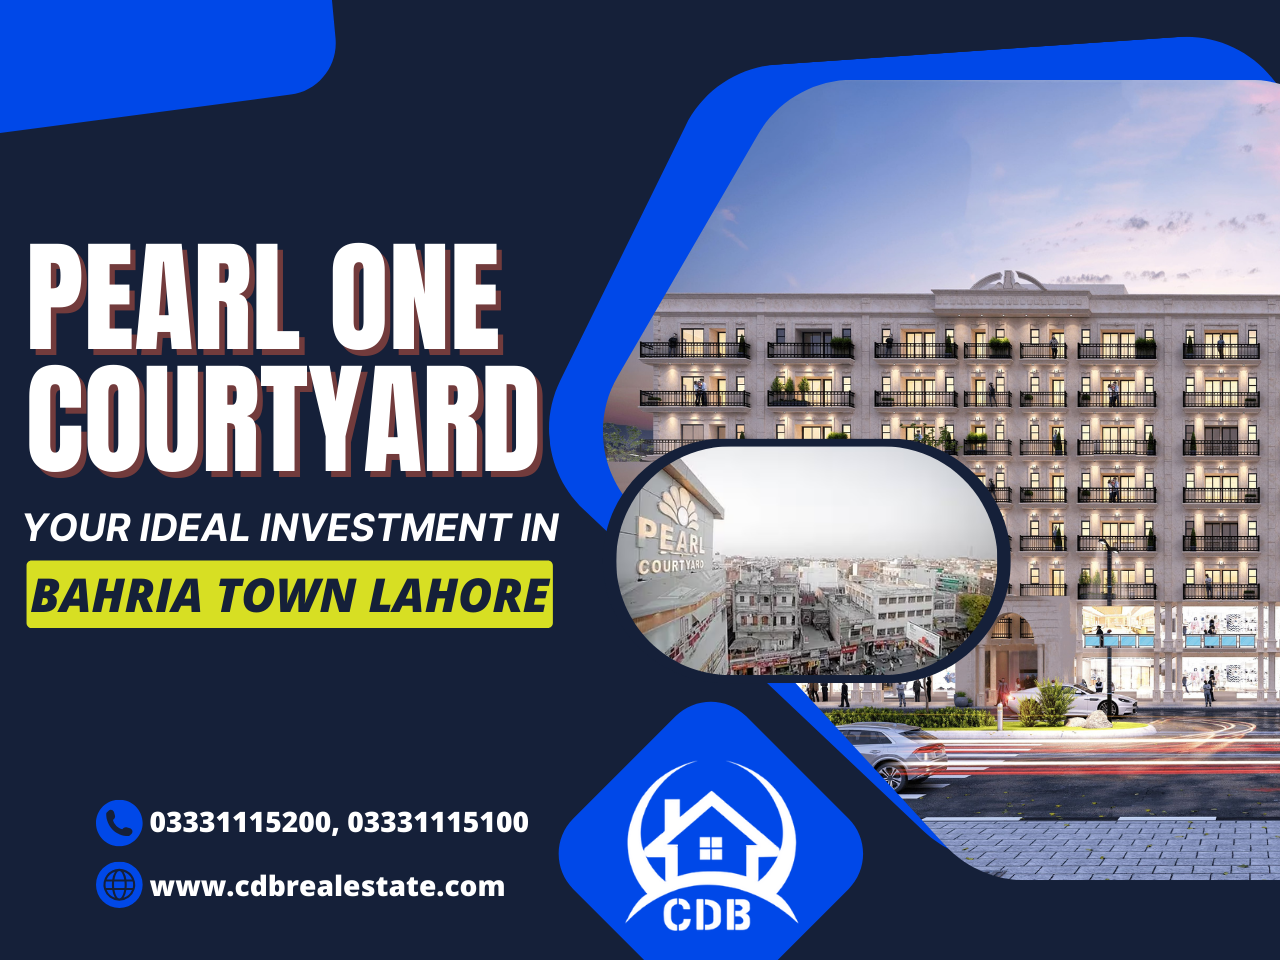 Pearl One Courtyard: Your Ideal Investment in Bahria Town Lahore